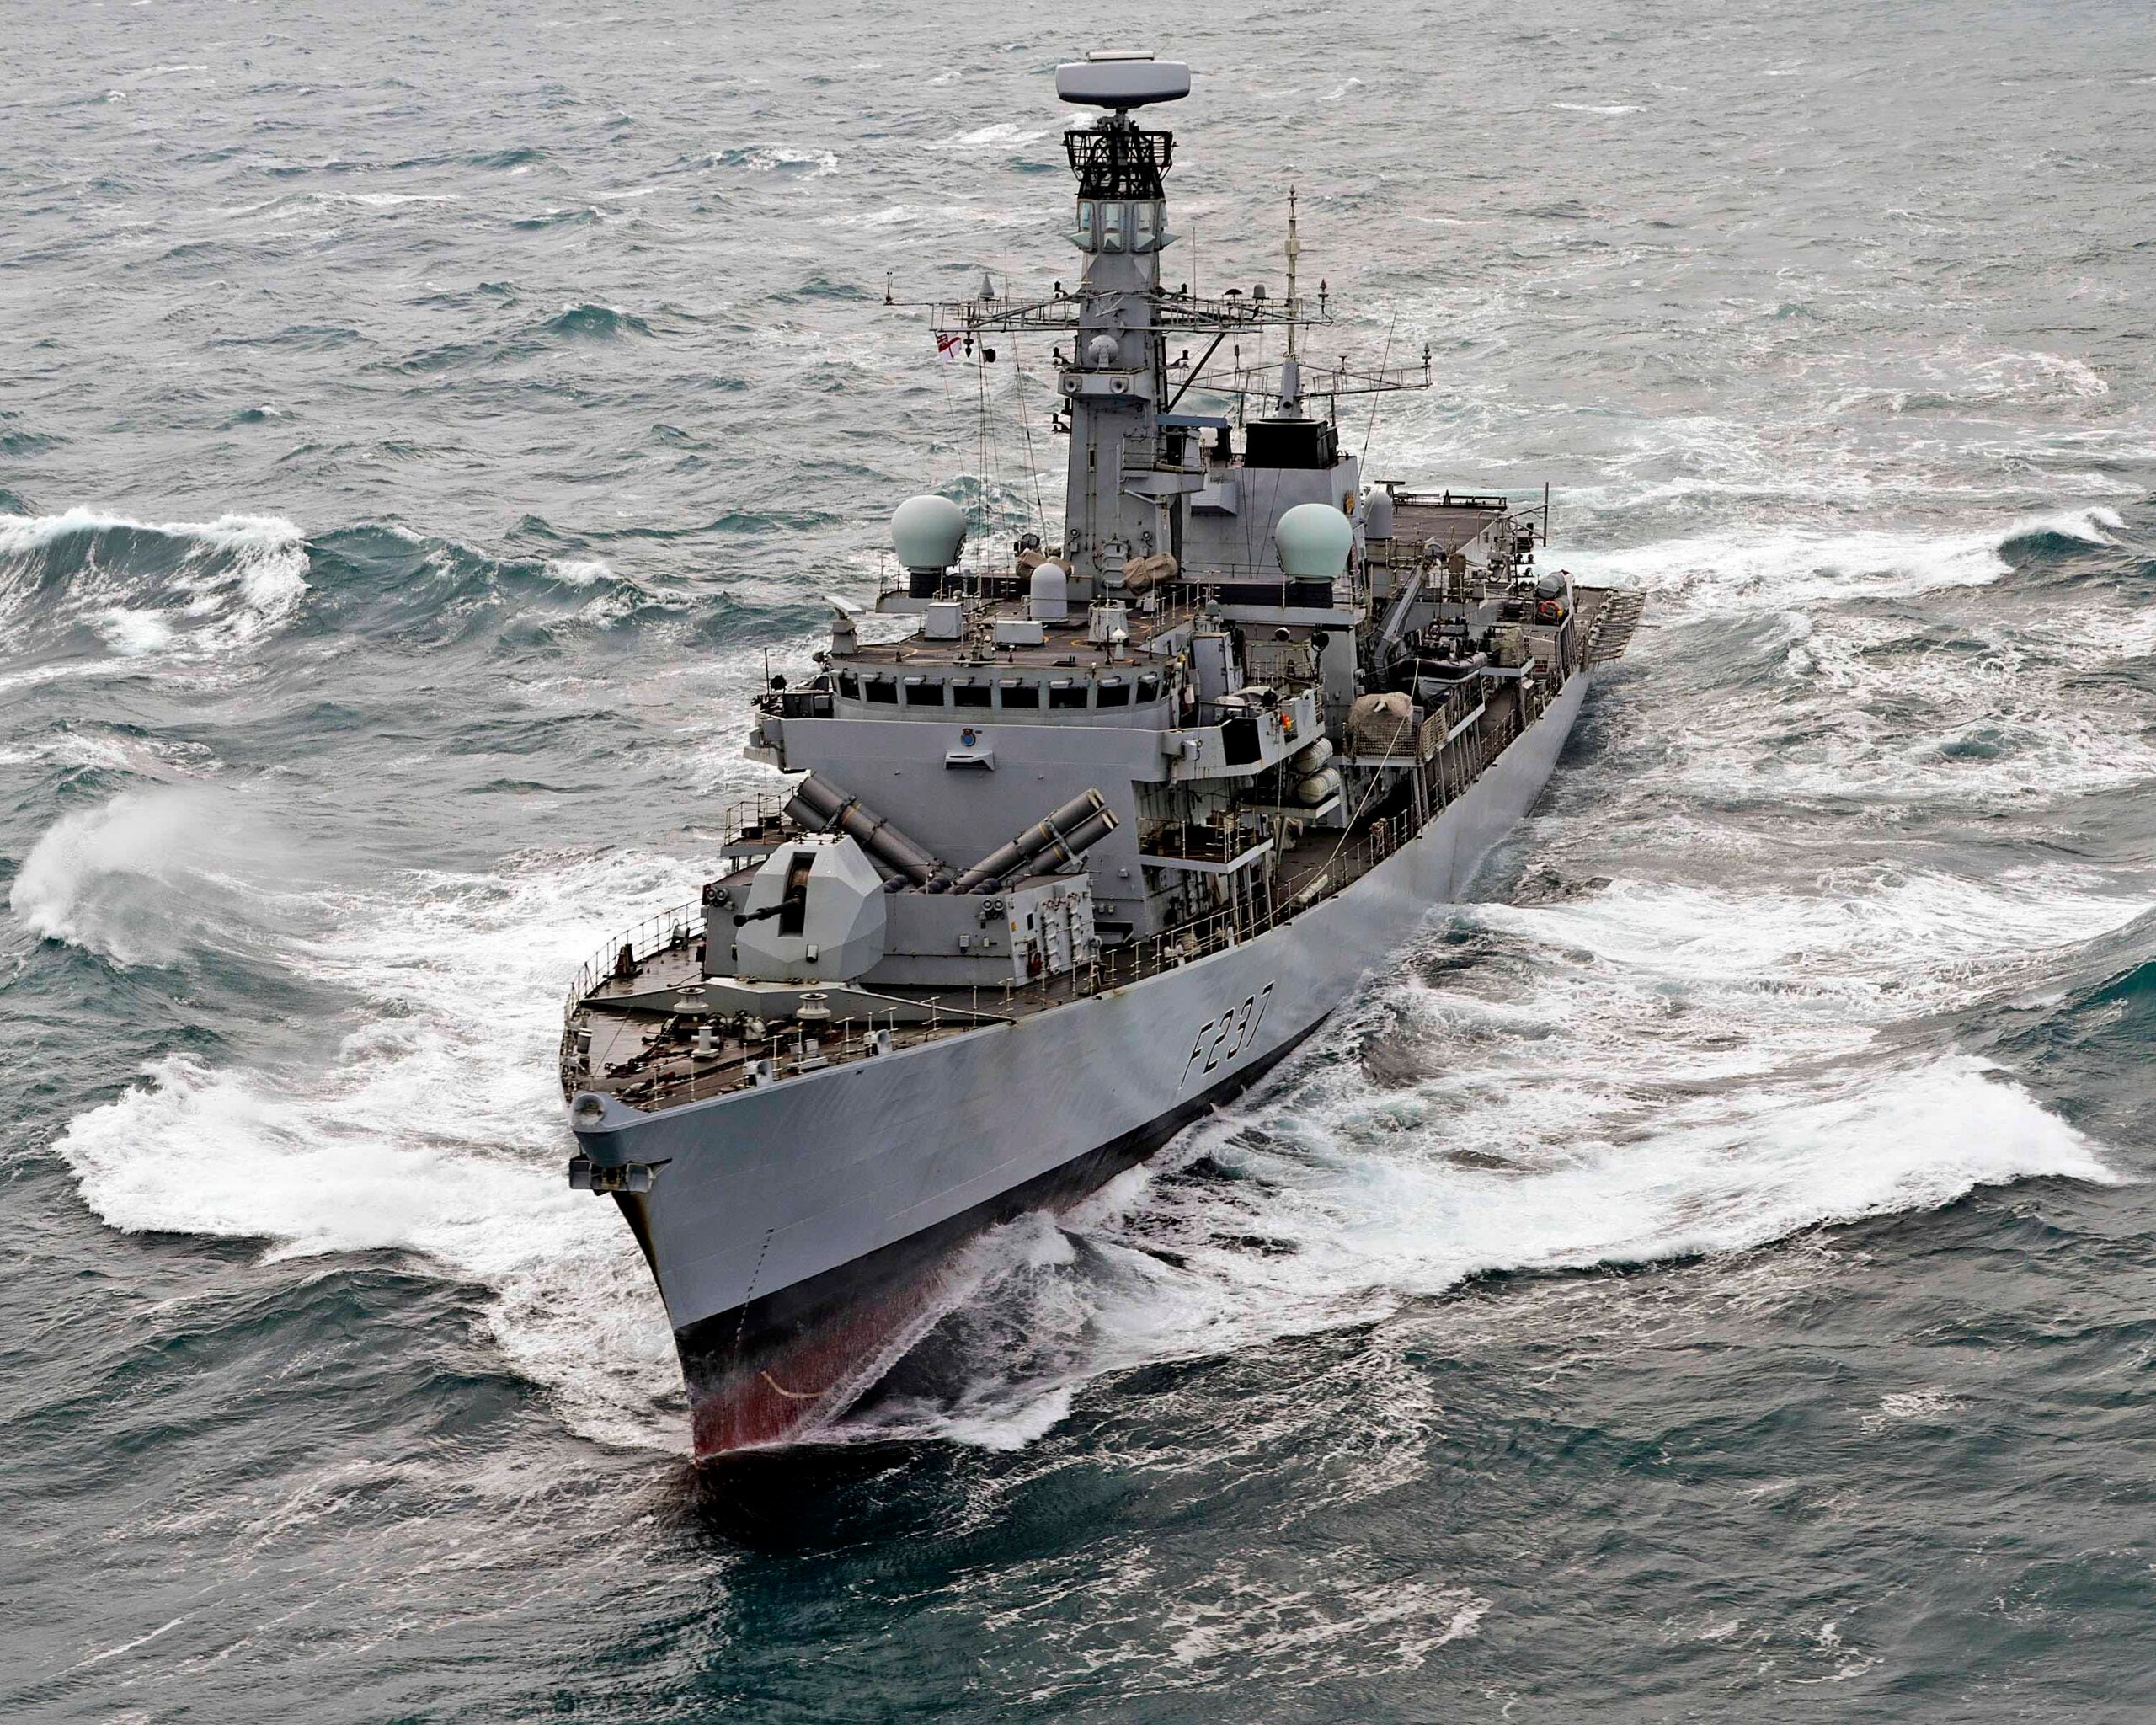 Pictured is HMS Westminster 30NM off the British coast.

HMS Westminster carried out her first fleet ready escort duty of 2018.

The ship and her crew escorted five Russian ships through the English Channel as they made their way home from the Mediterranean Sea.

Russian supply ships - the Mod Altay Kola and a tug the Silva Paradoks (921) were joined by two Steregushchiy class frigates, Boiky (532) and Soobrazitelny (531).